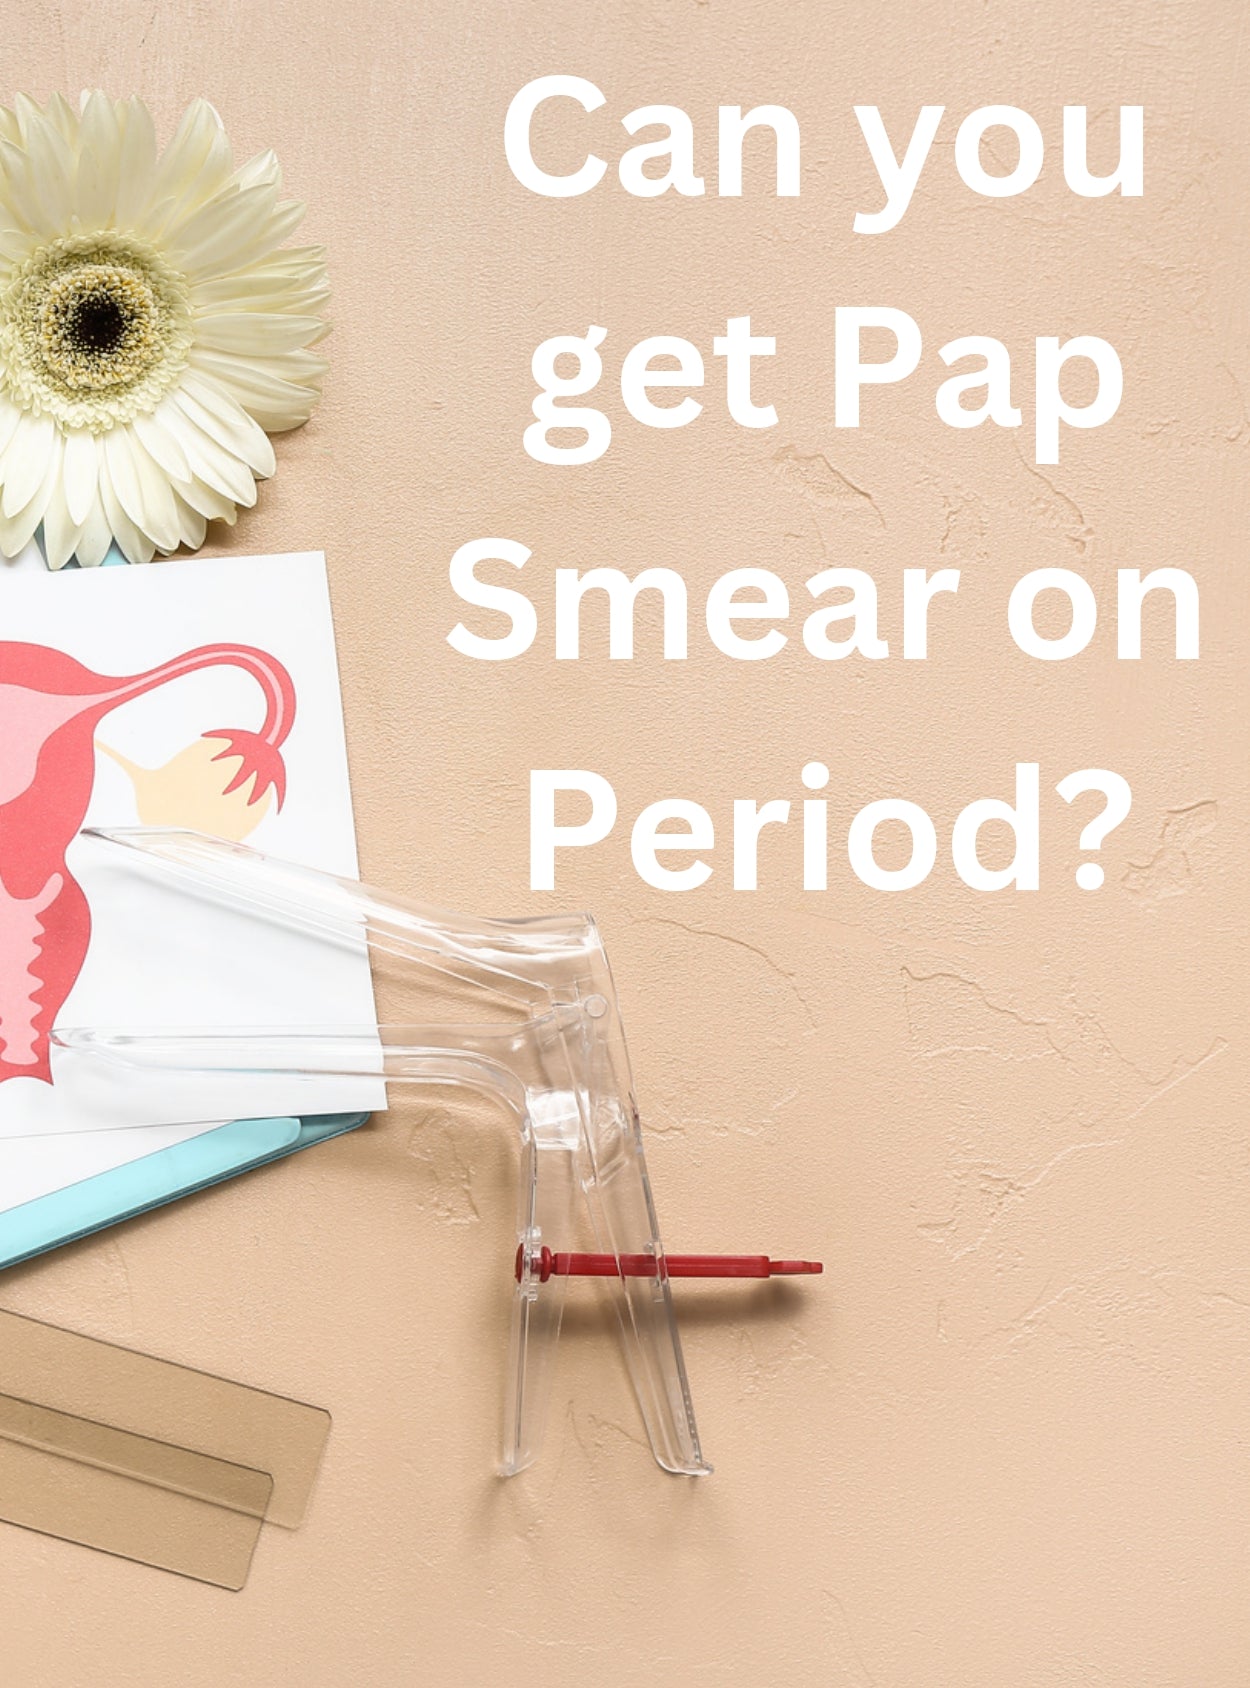 Can you get a Pap Smear on Period?